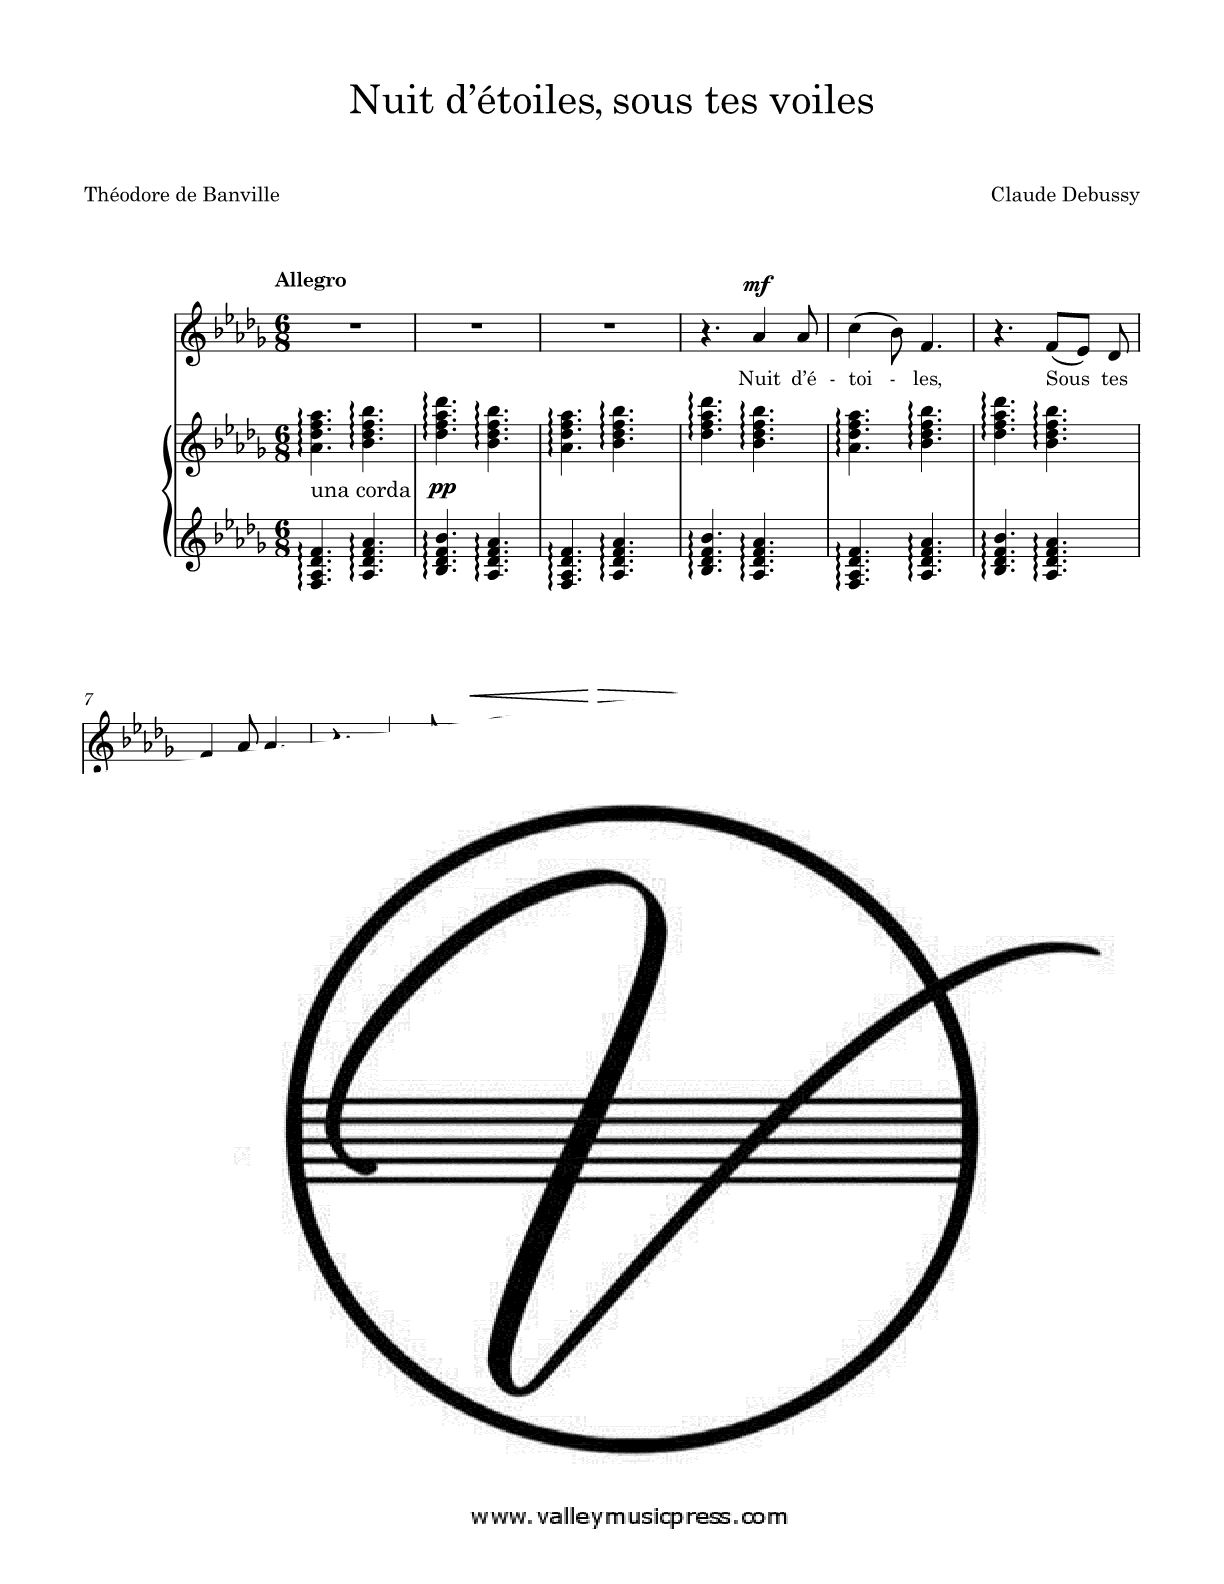 Debussy Nuit D Etoiles Voice Claude Debussy Nuit D Etoiles Sous Tes Voiles For Voice And Piano Accompaniment Downloadable Pdf Sheet Music Transposed Any Key Any Clef Vmp500 5 49 Valley Music